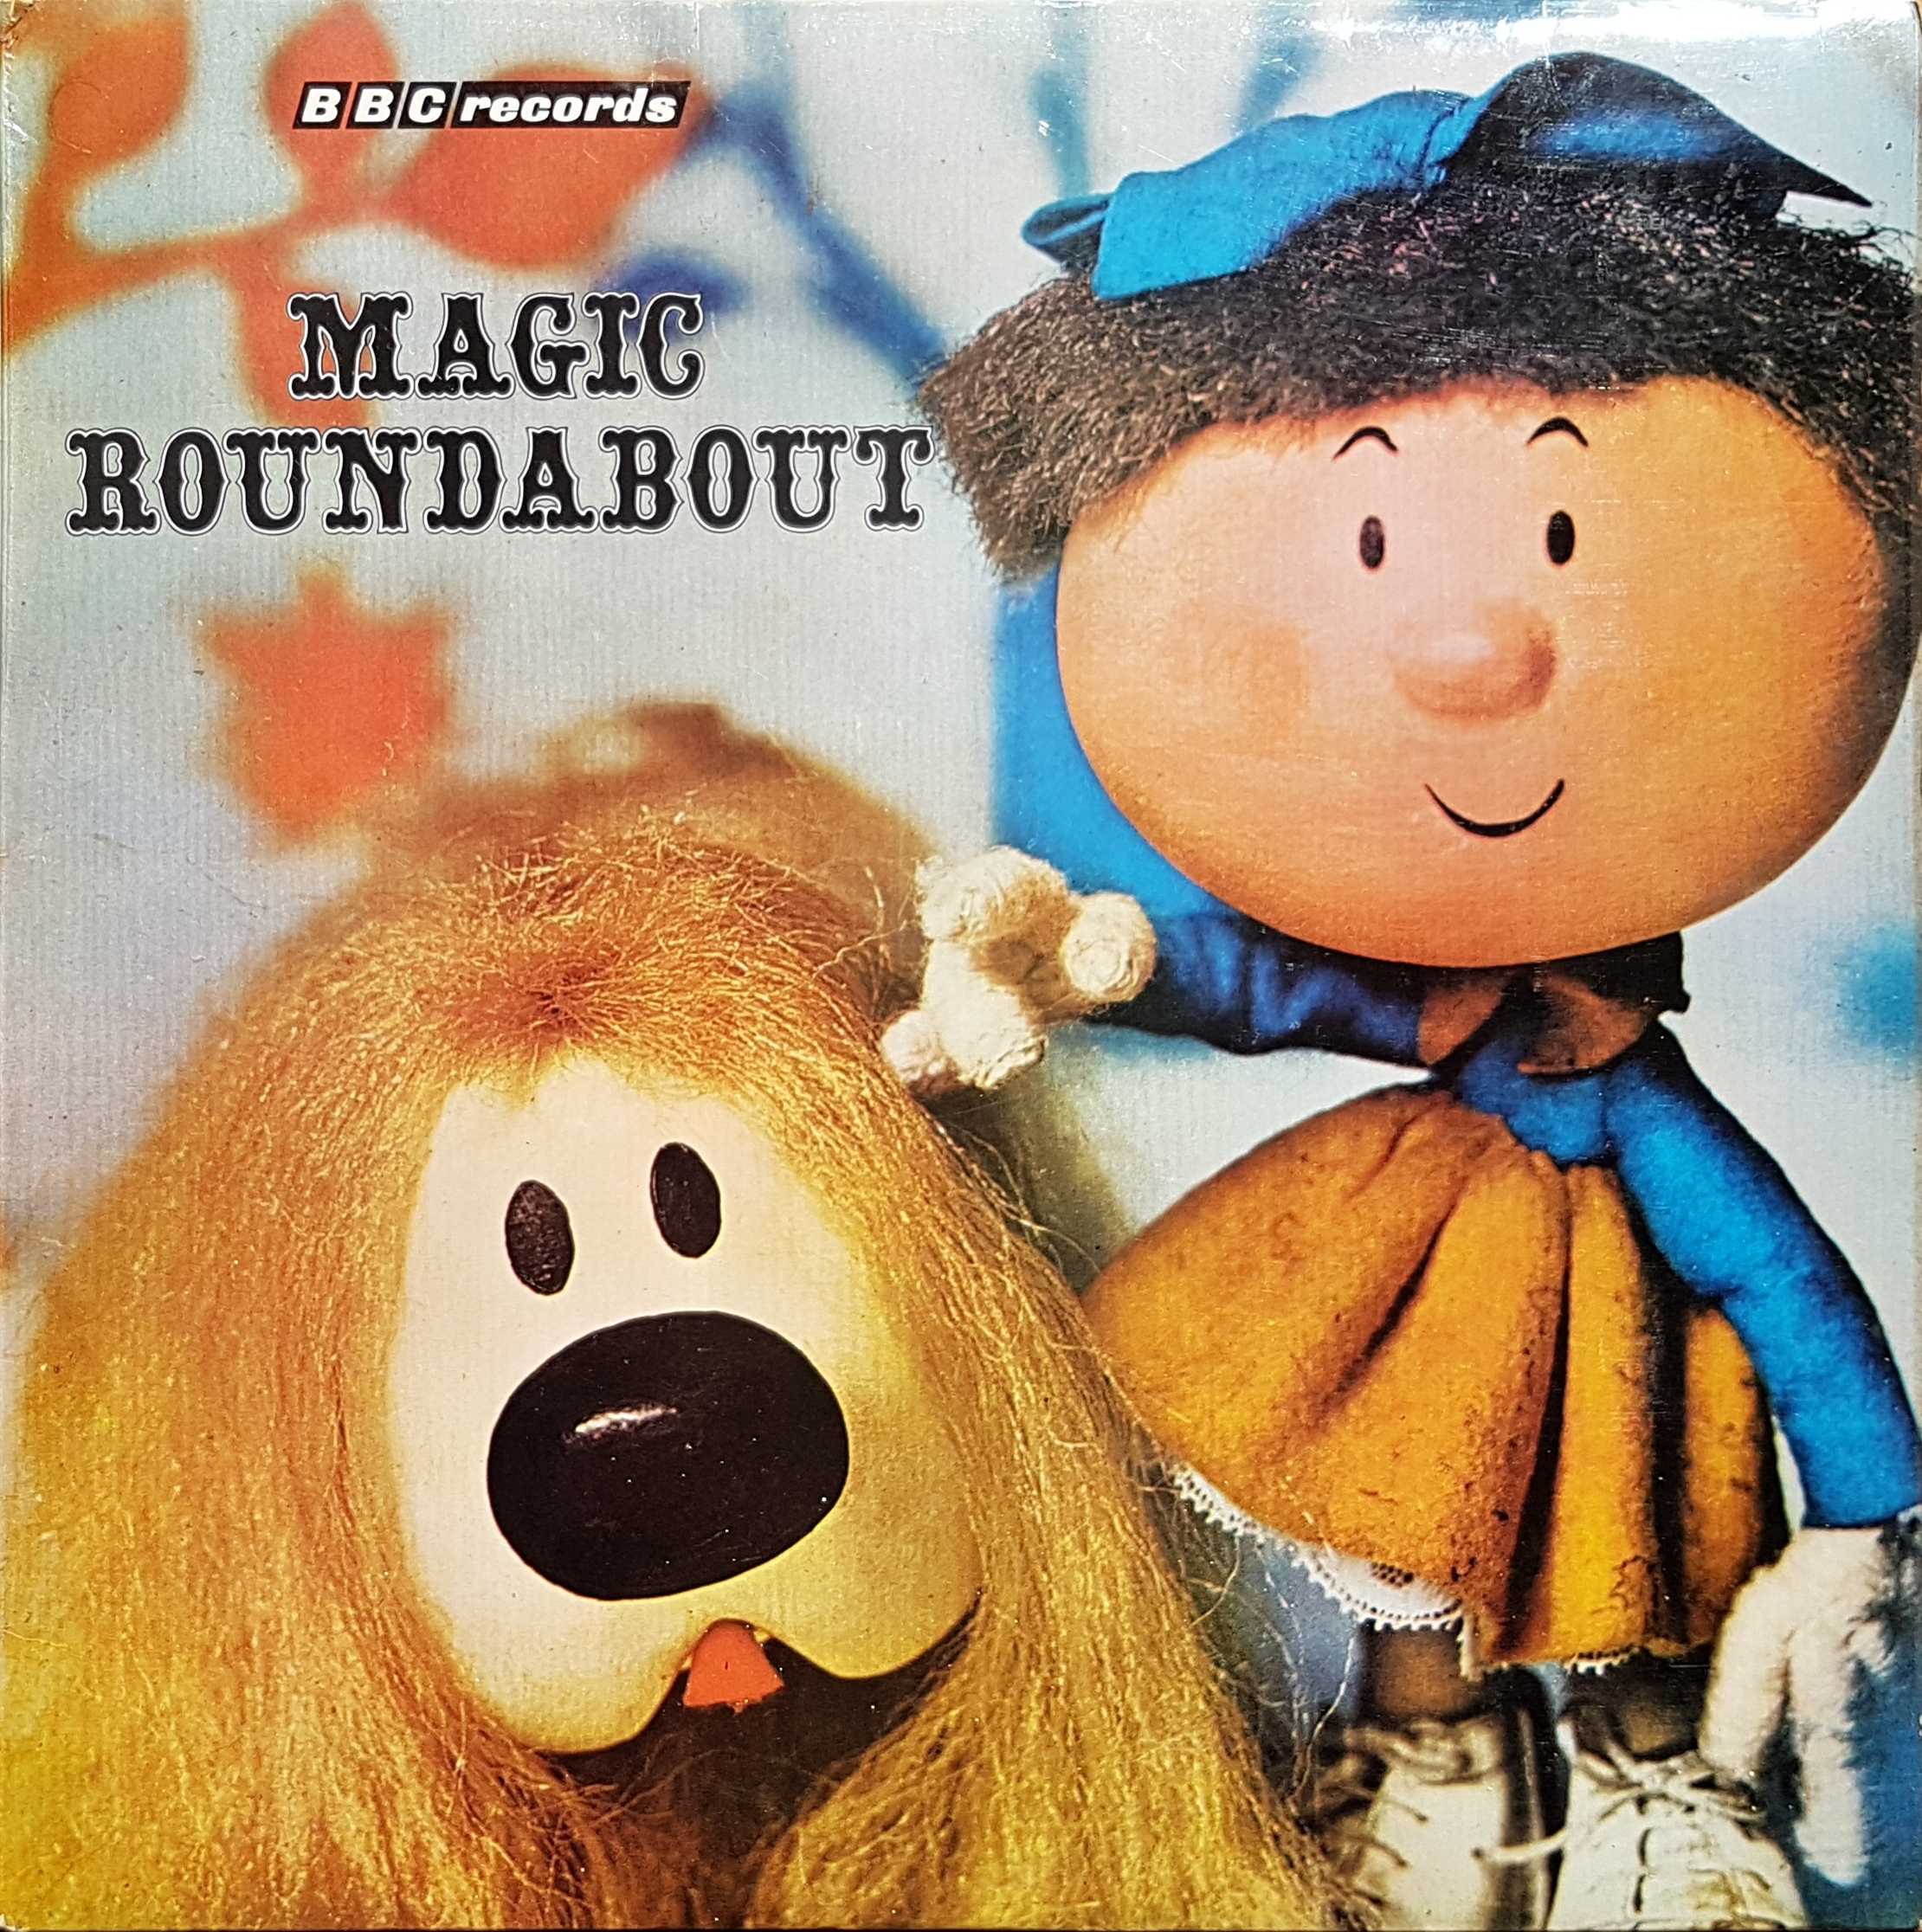 Picture of RBT 8 The magic roundabout by artist Eric Thompson from the BBC albums - Records and Tapes library